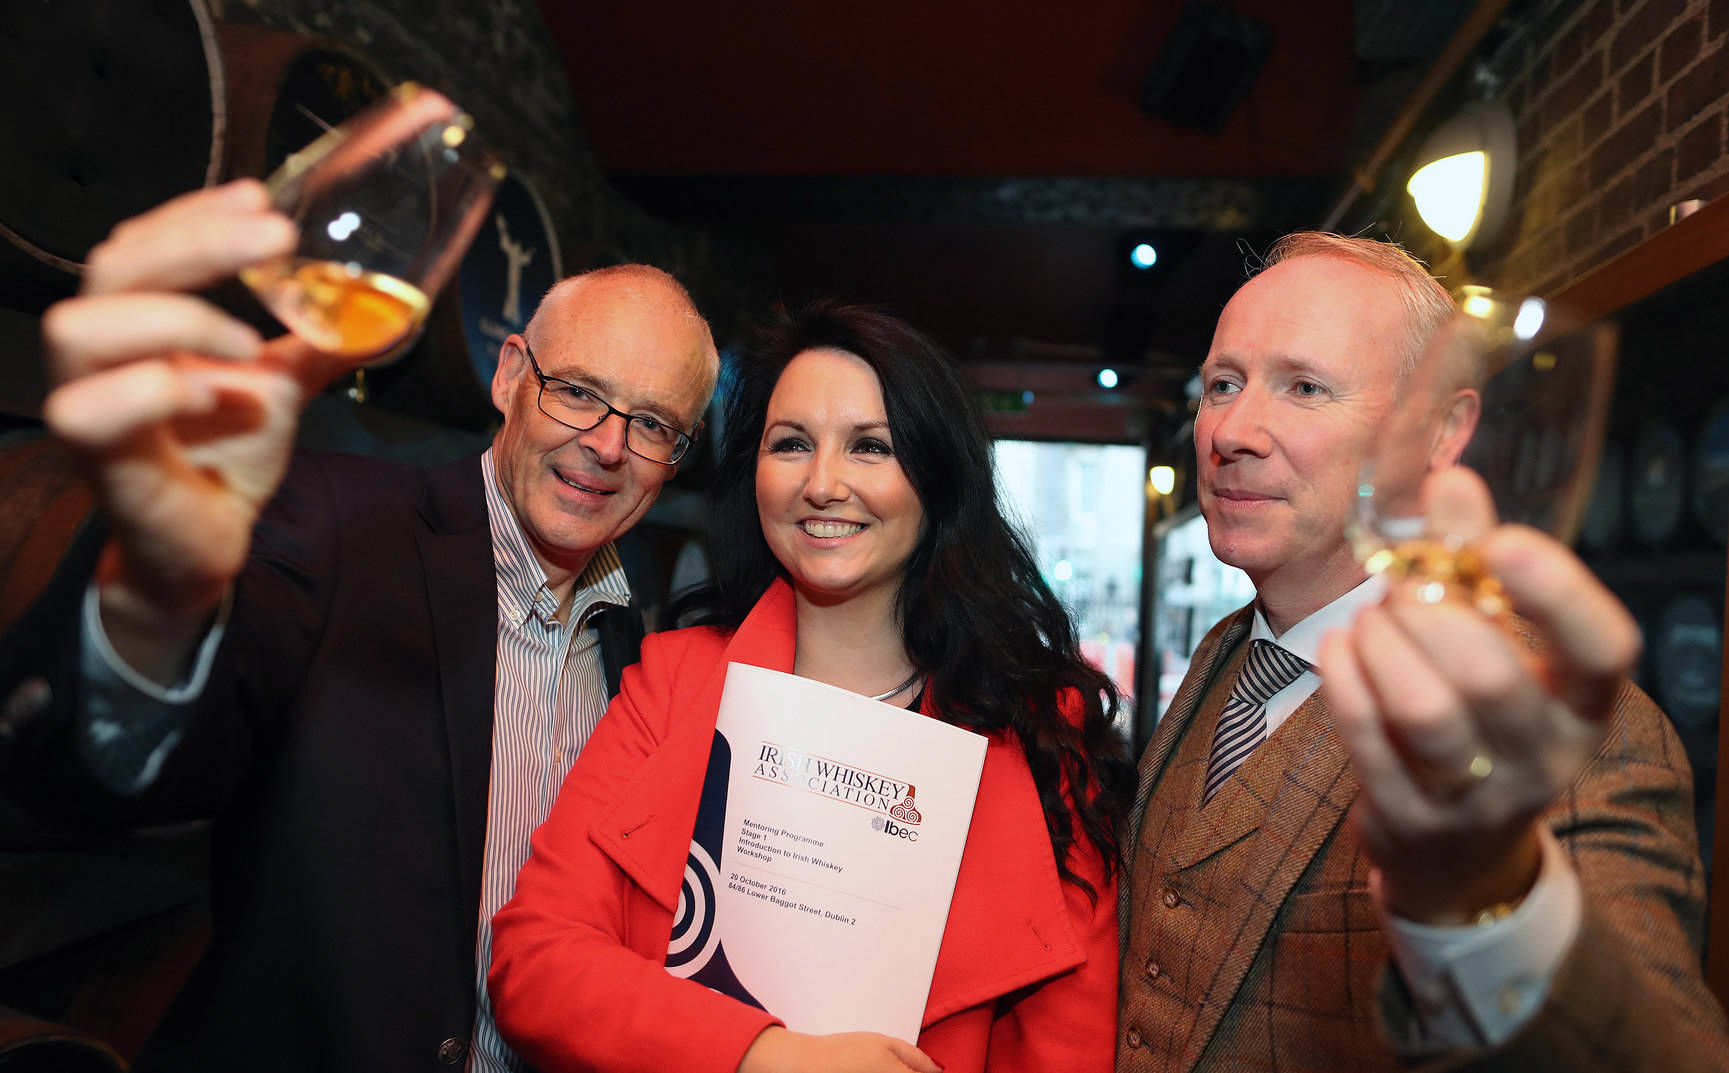 At the launch of the new Irish whiskey mentoring programme were (from left): Technical Director at Irish Distillers David Quinn, Head of the Irish Whiskey Association Miriam Mooney and Chairman of the Irish Whiskey Association Bernard Walsh.